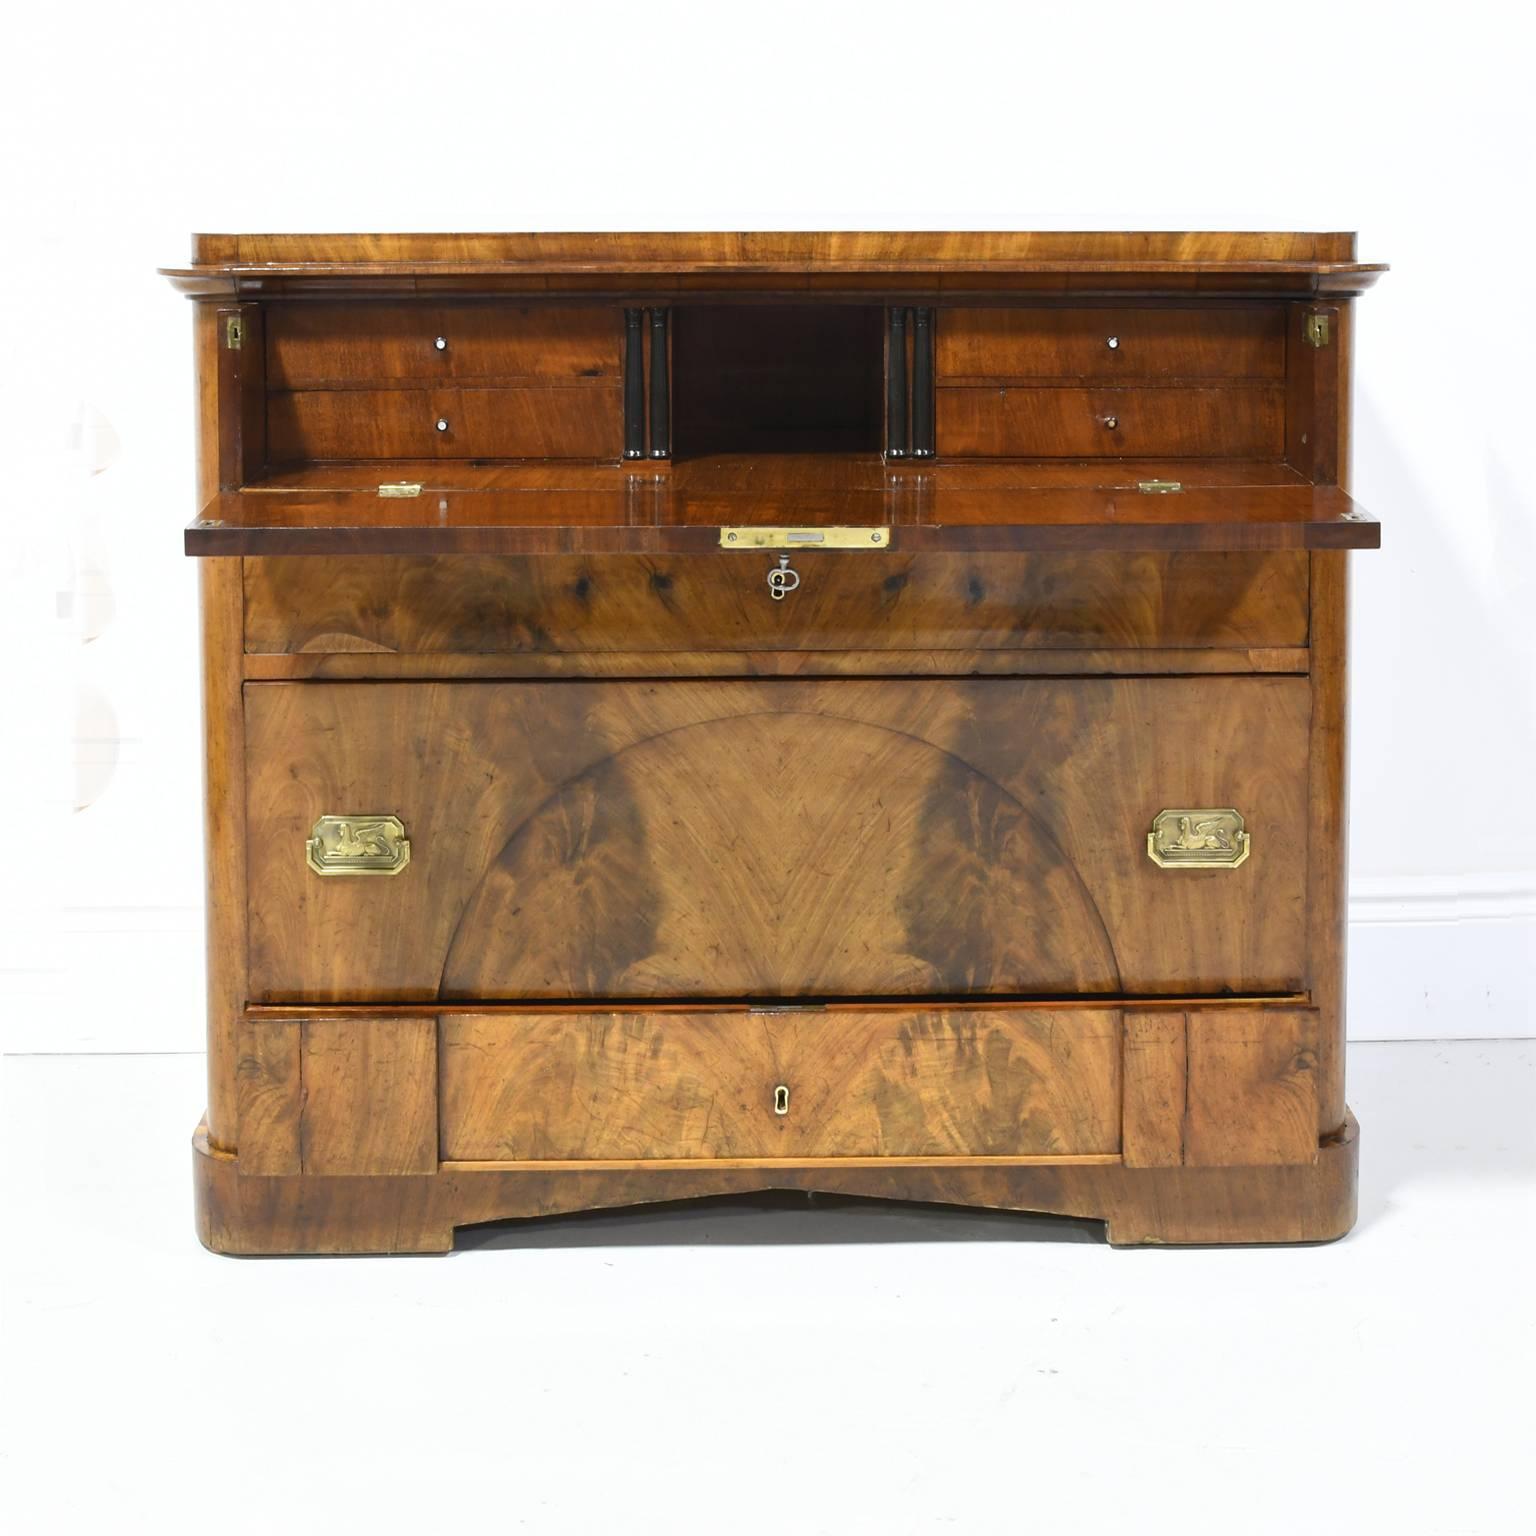 A Biedermeier chest in figured and bookmatched West Indies mahogany with three storage drawers of various depths below a drawer-front that opens to a secretary desk with four interior drawers around an open cubby, North German, circa